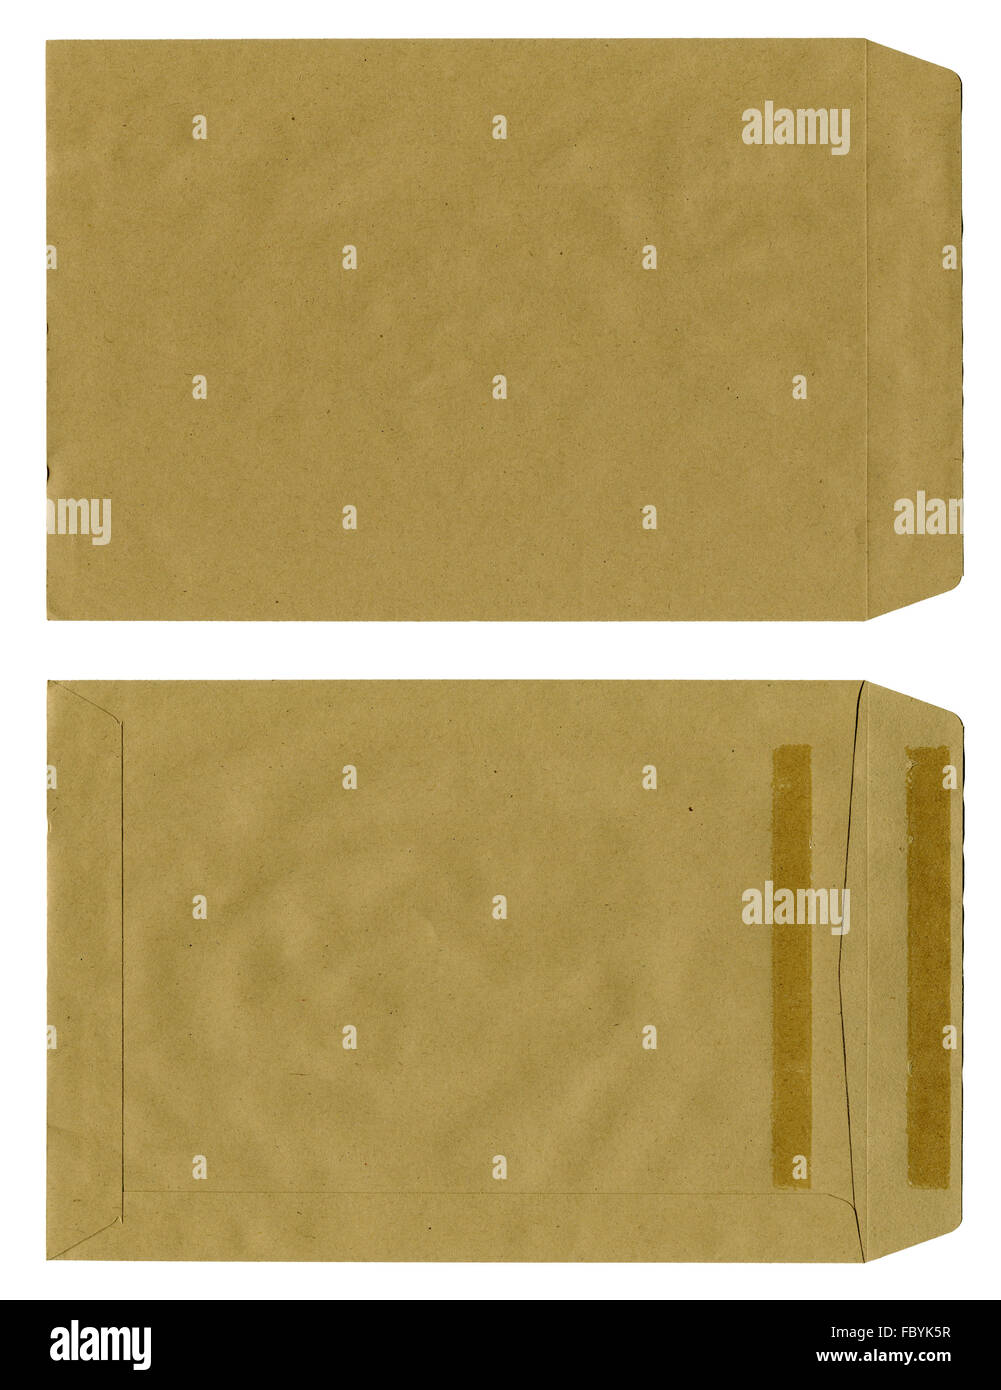 front and back side of a brown envelope Stock Photo - Alamy